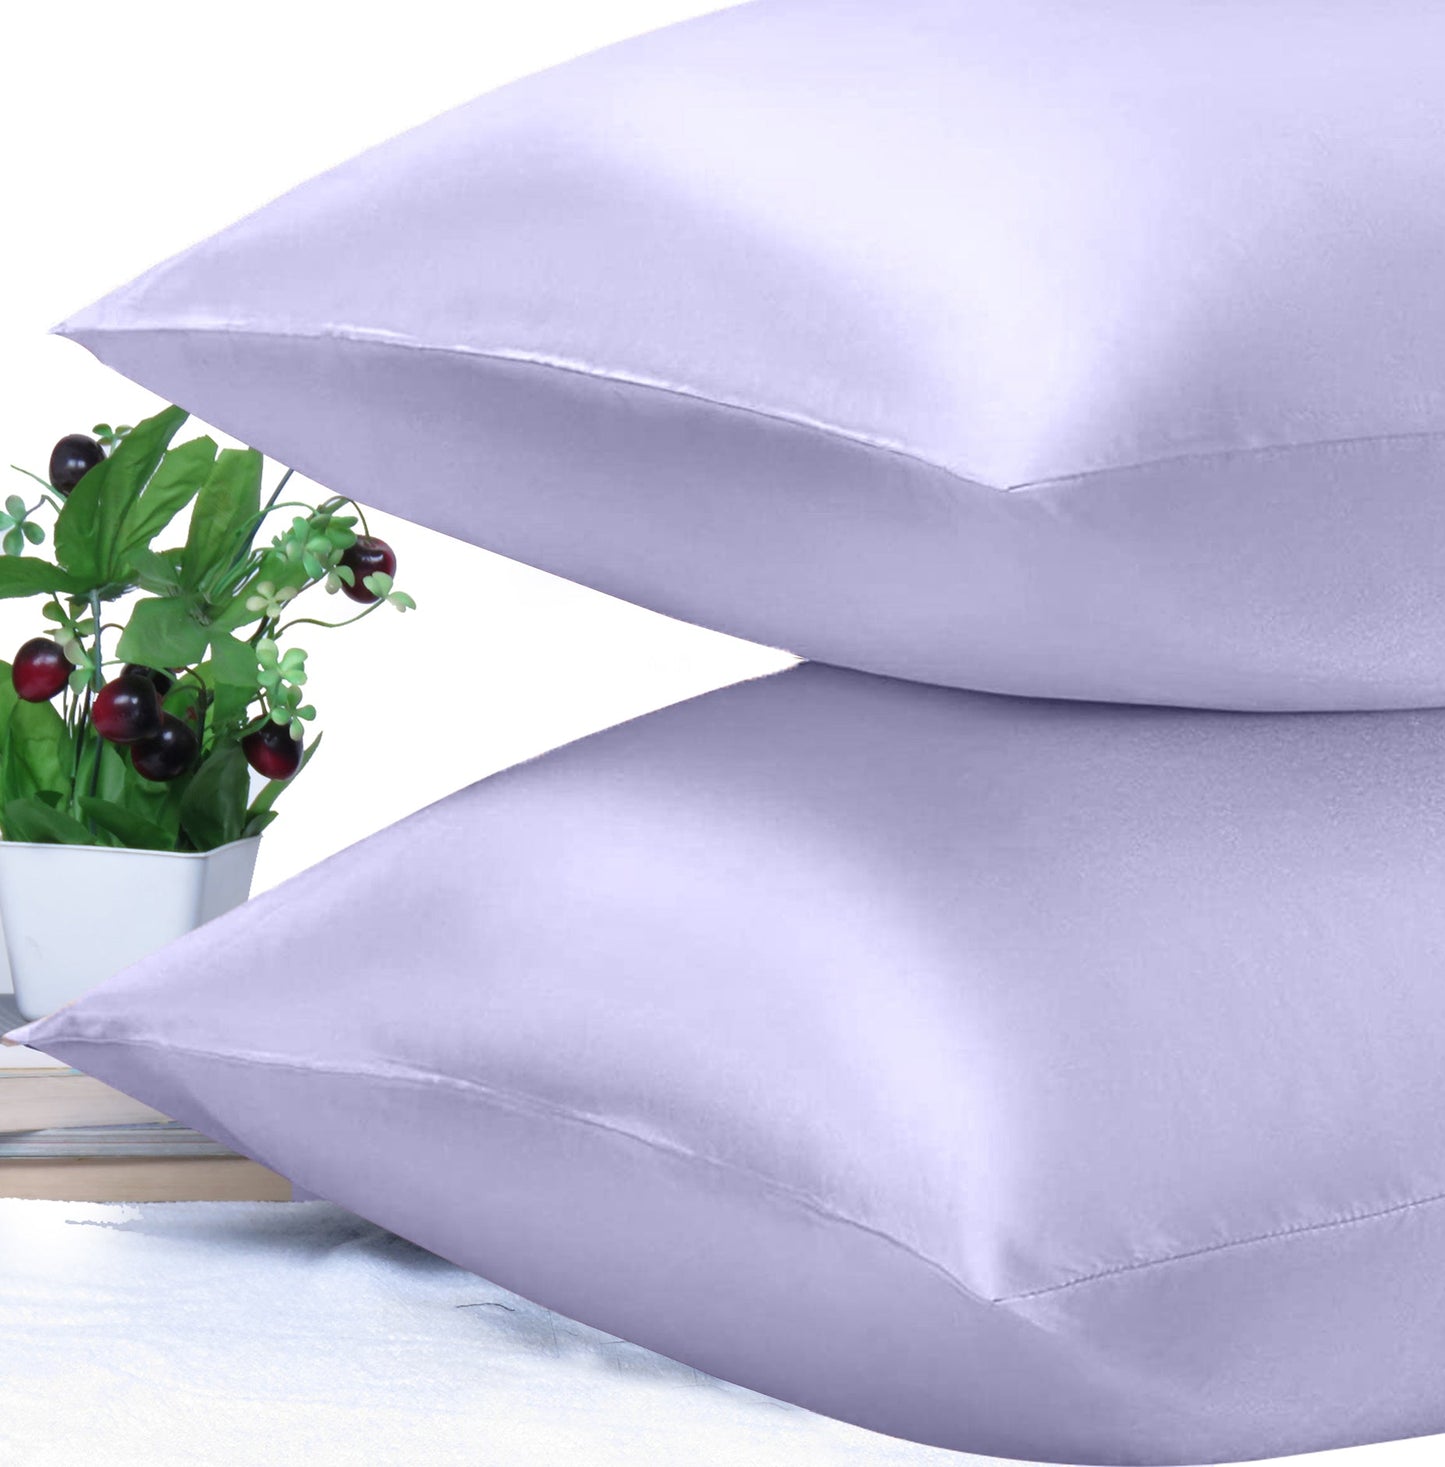 Luxury Soft Plain Satin Silk Pillowcases in Set of 2 - Orchid Bloom